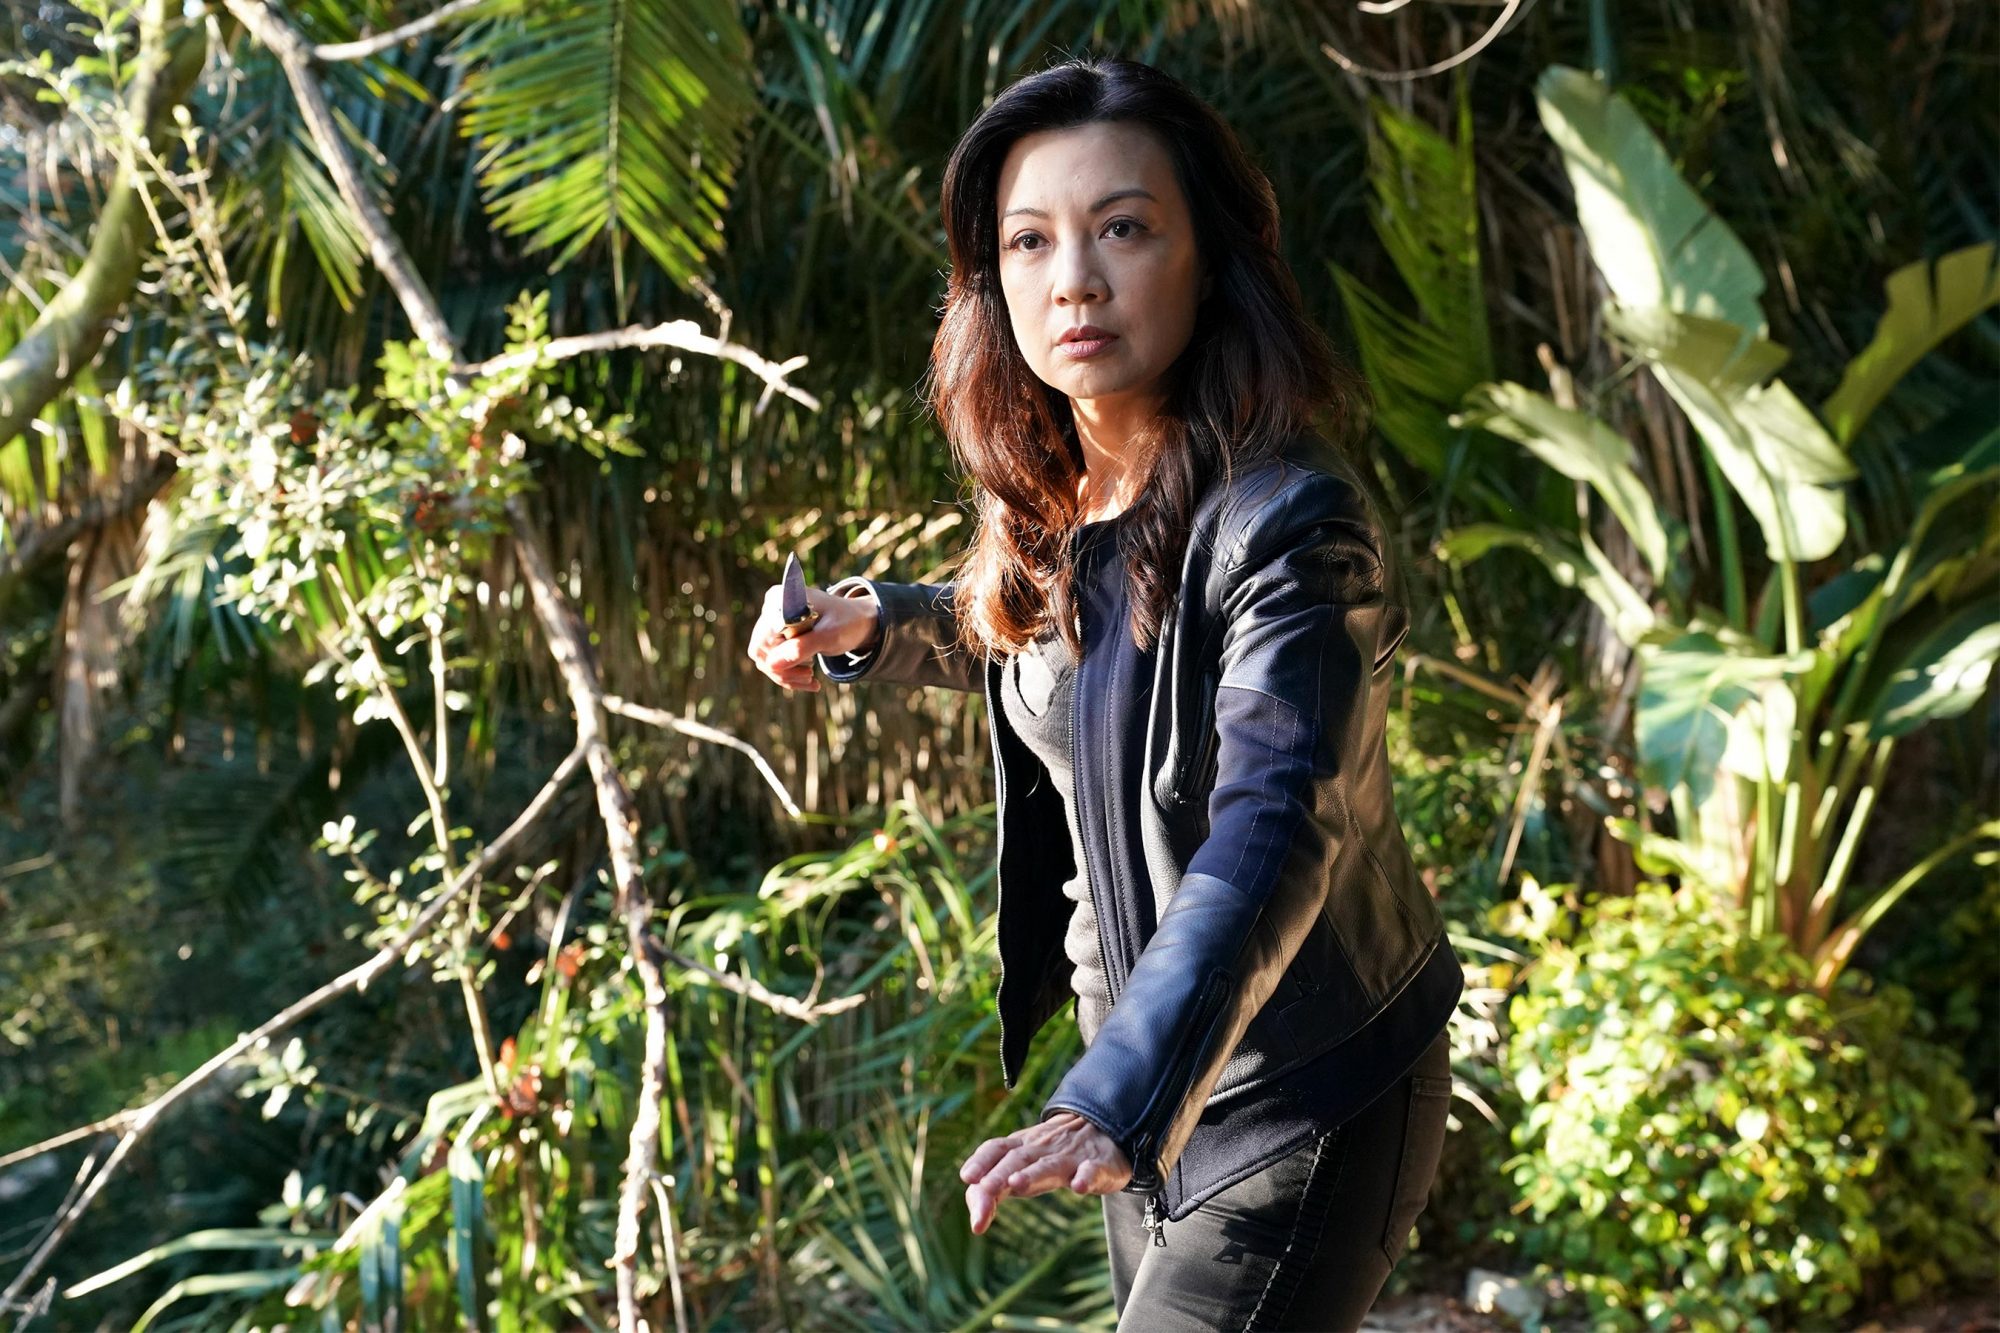 MARVEL'S AGENTS OF S.H.I.E.L.D. - "The Sign/New Life" - With time running short, the team will have to go to hell and back to stop the end of everything. Who will survive? Find out on the blockbuster two-hour season finale of "Marvel's Agents of S.H.I.E.L.D." airing FRIDAY, AUG. 2 (8:00-10:01 p.m. EDT), on ABC. (ABC/Mitch Haaseth) MING-NA WEN